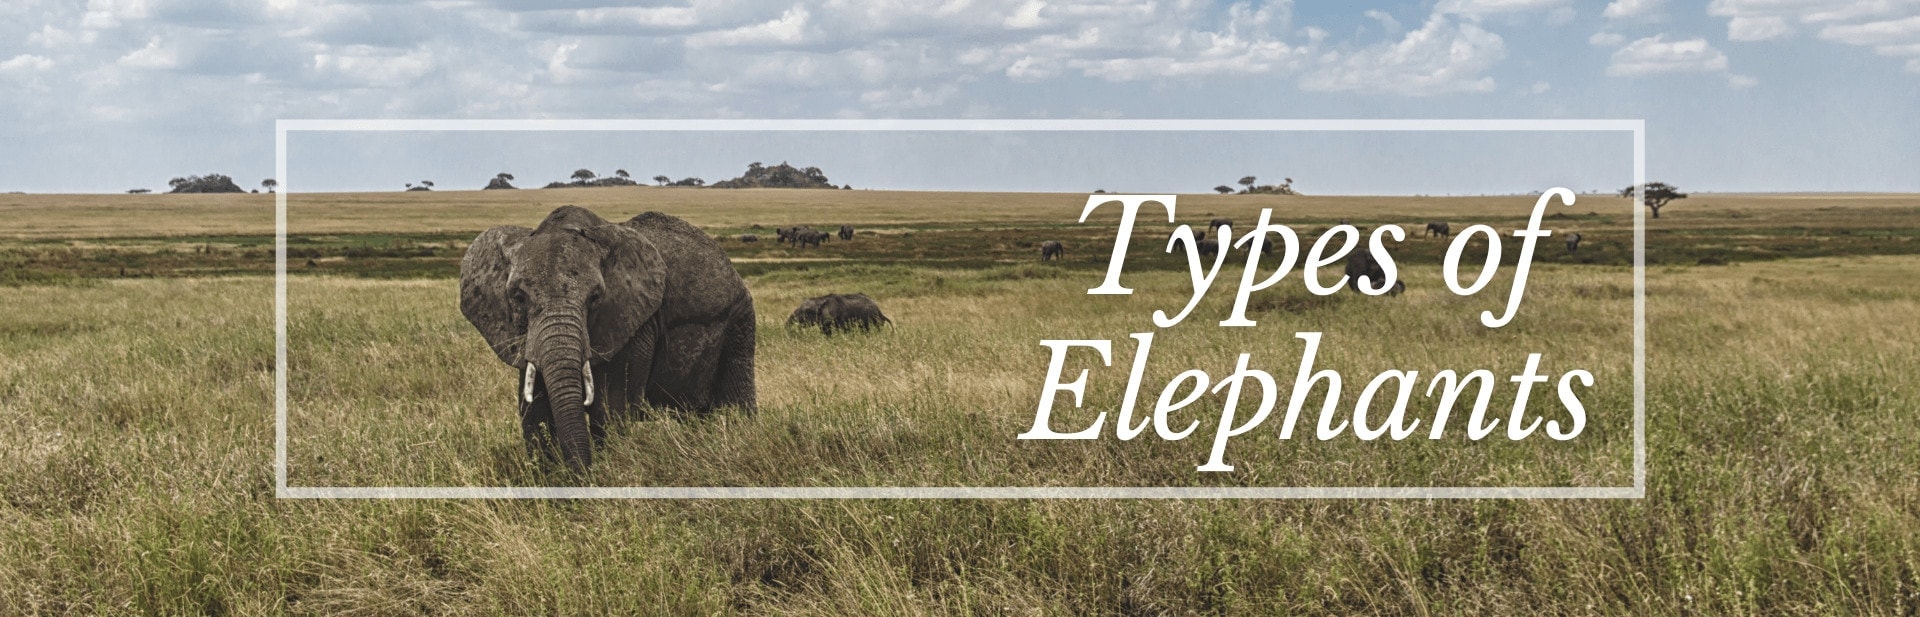 6 Fascinating Types of Elephants (Photos and More)